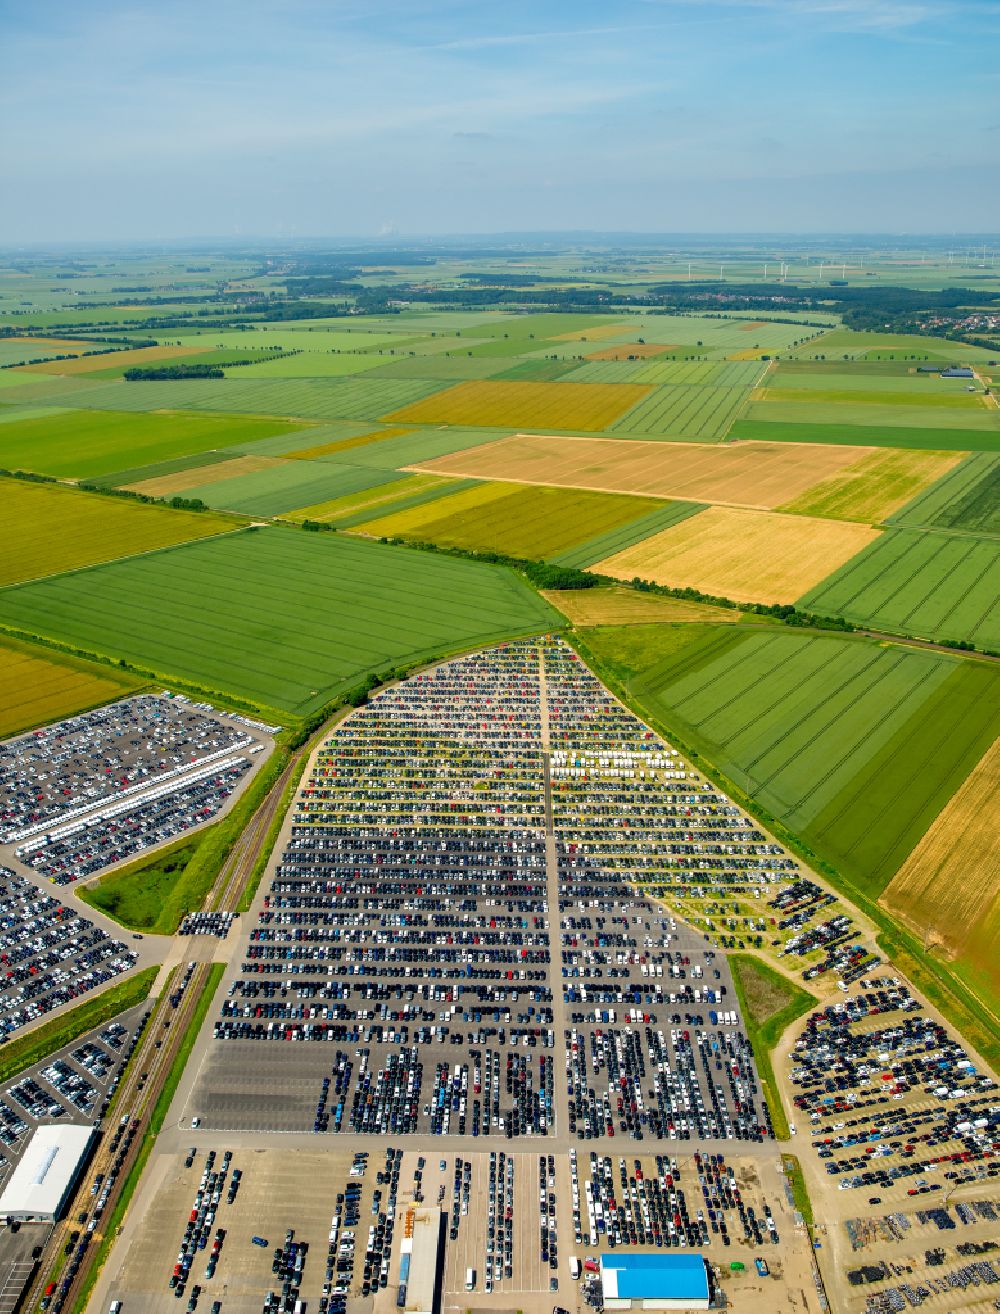 Zülpich from above - Parking and storage space for new cars Automobile in Zuelpich in North Rhine-Westphalia. Operator of the site is the Norwegian - Swedish shipping company Wallenius Wilhelmsen Logistics, which deals mainly with the global transport of cars, trucks and other rolling cargoes